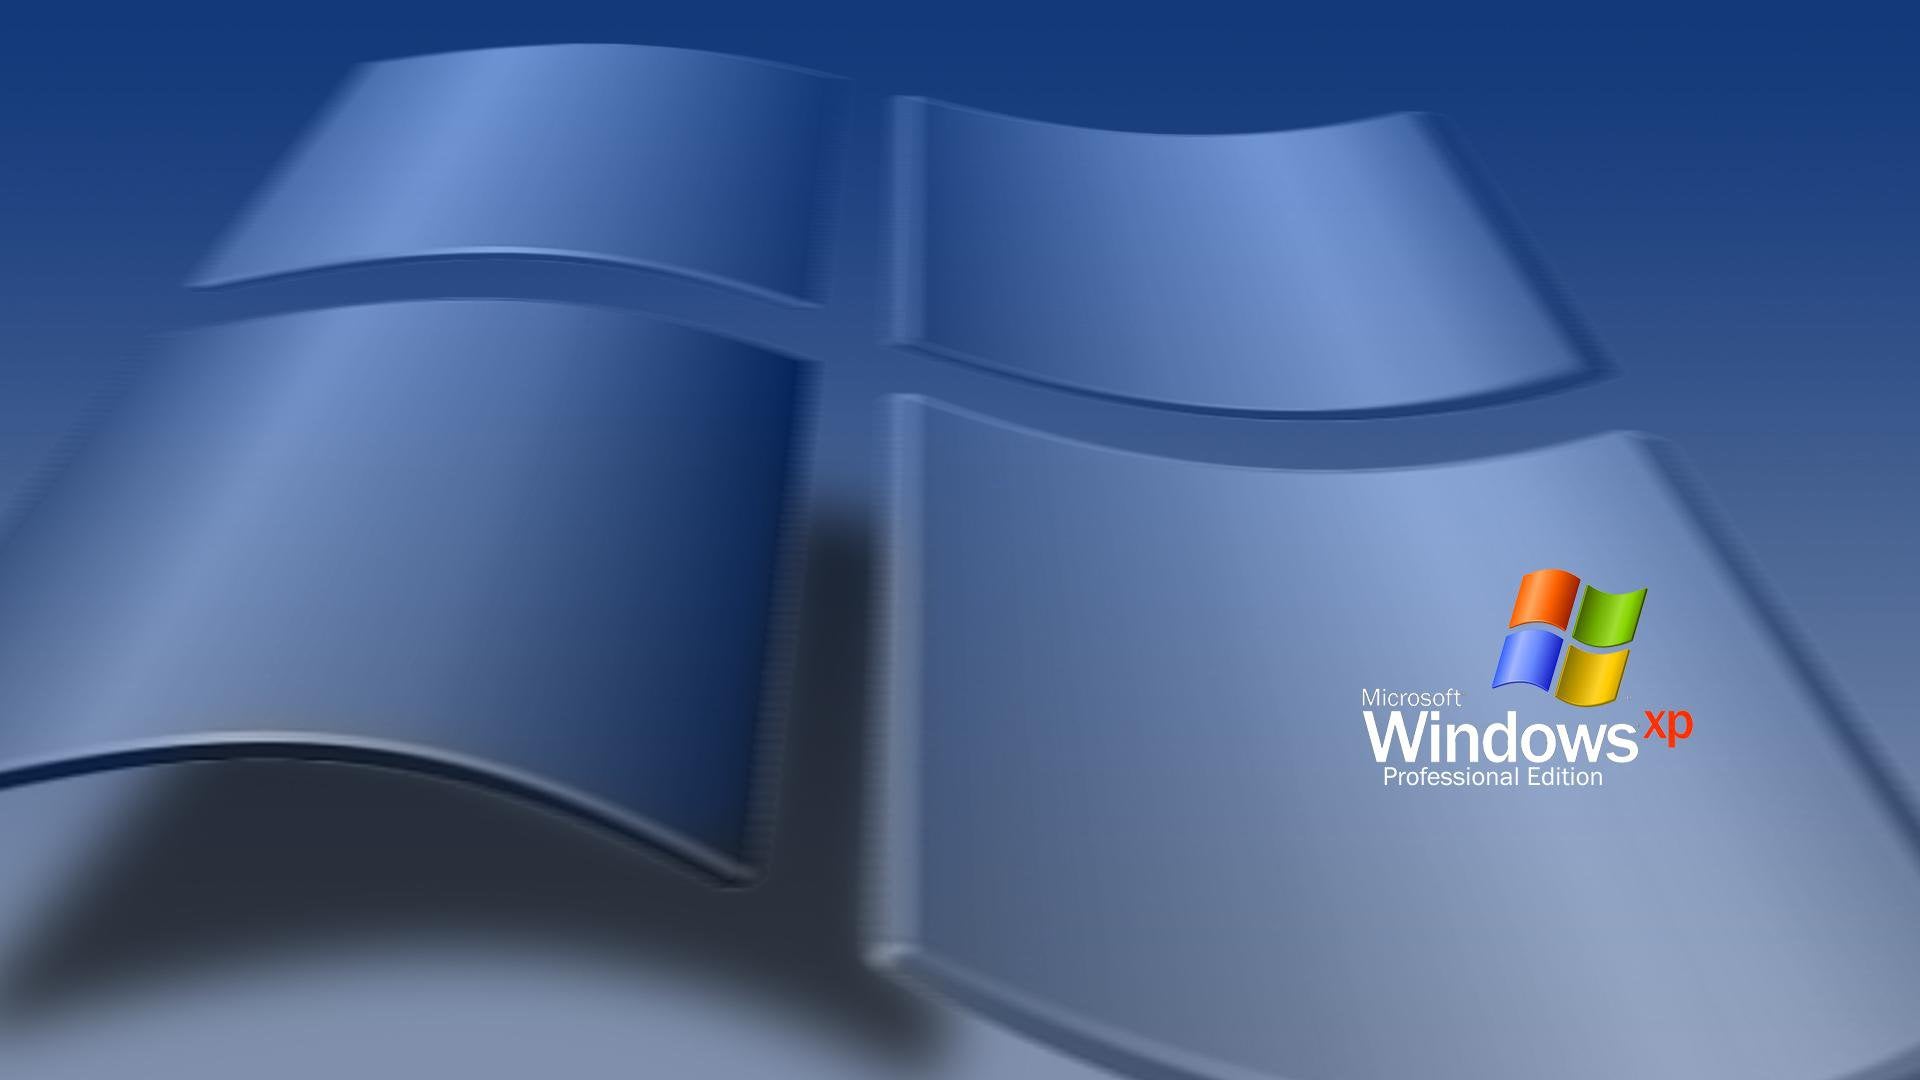 Any early 2000s Windows aesthetic wallpaper?: wallpaper